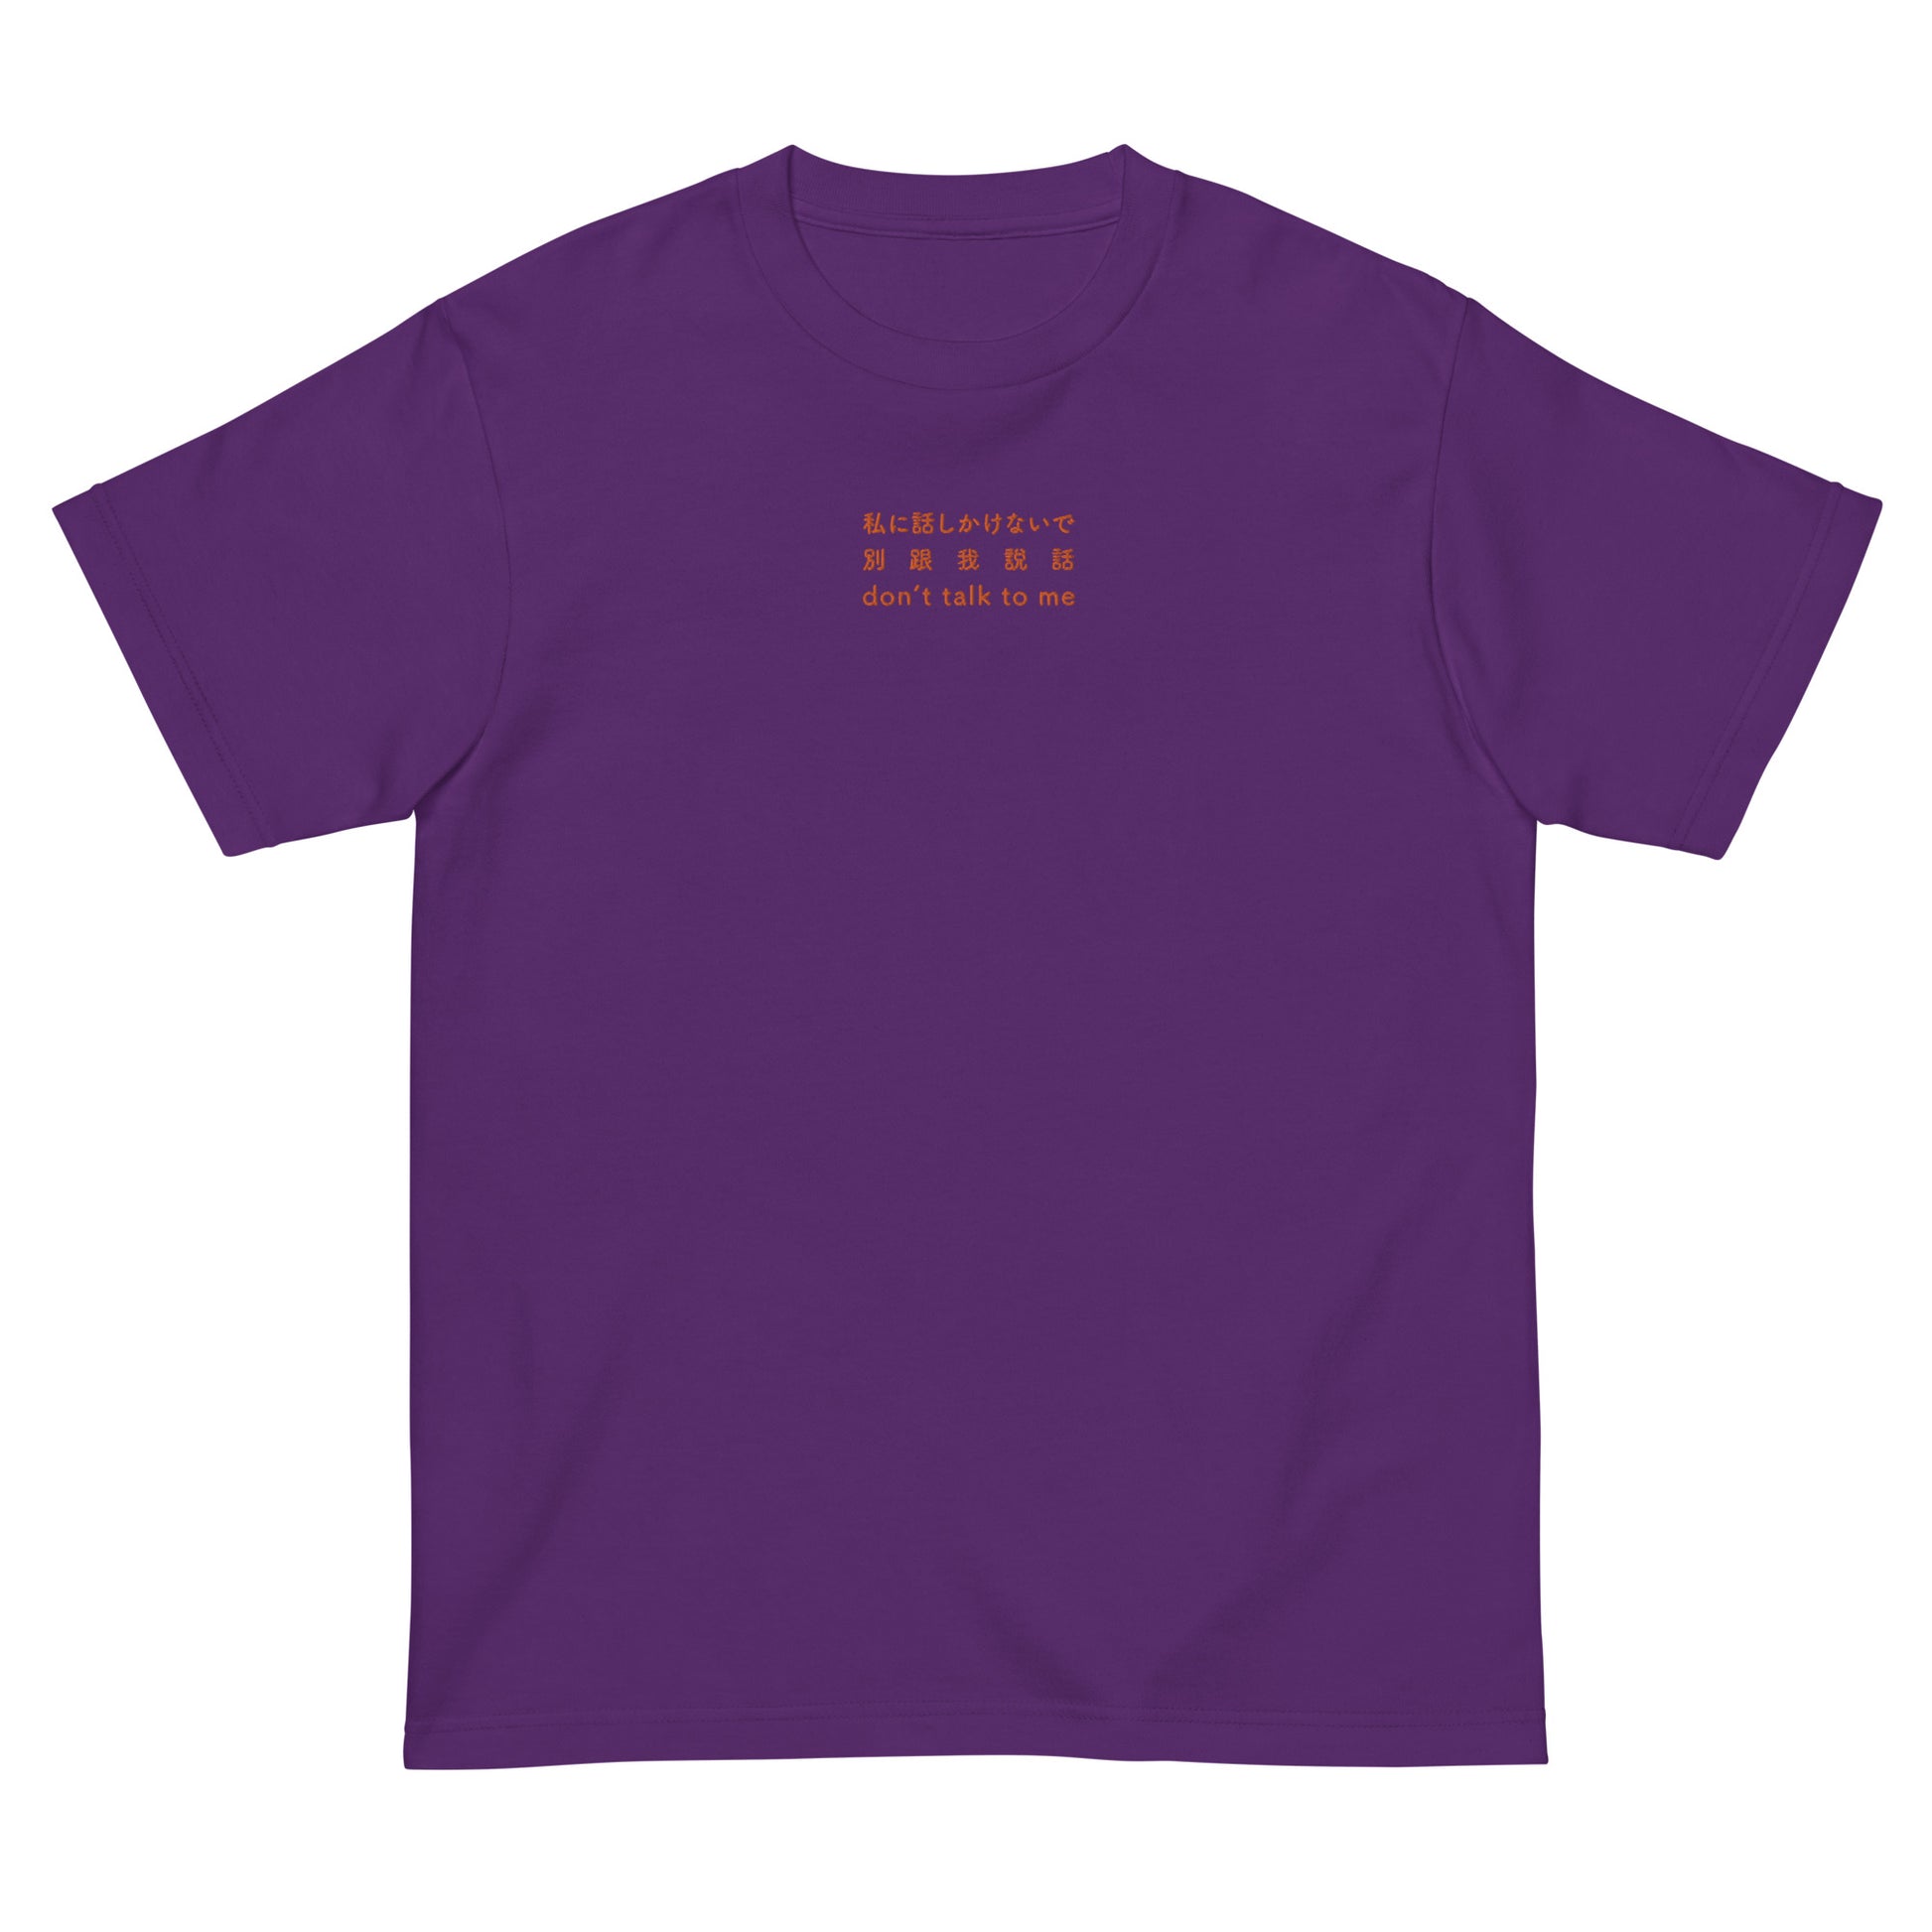 Purple High Quality Tee - Front Design with an Orange Embroidery "don't talk to me" in Japanese,Chinese and English